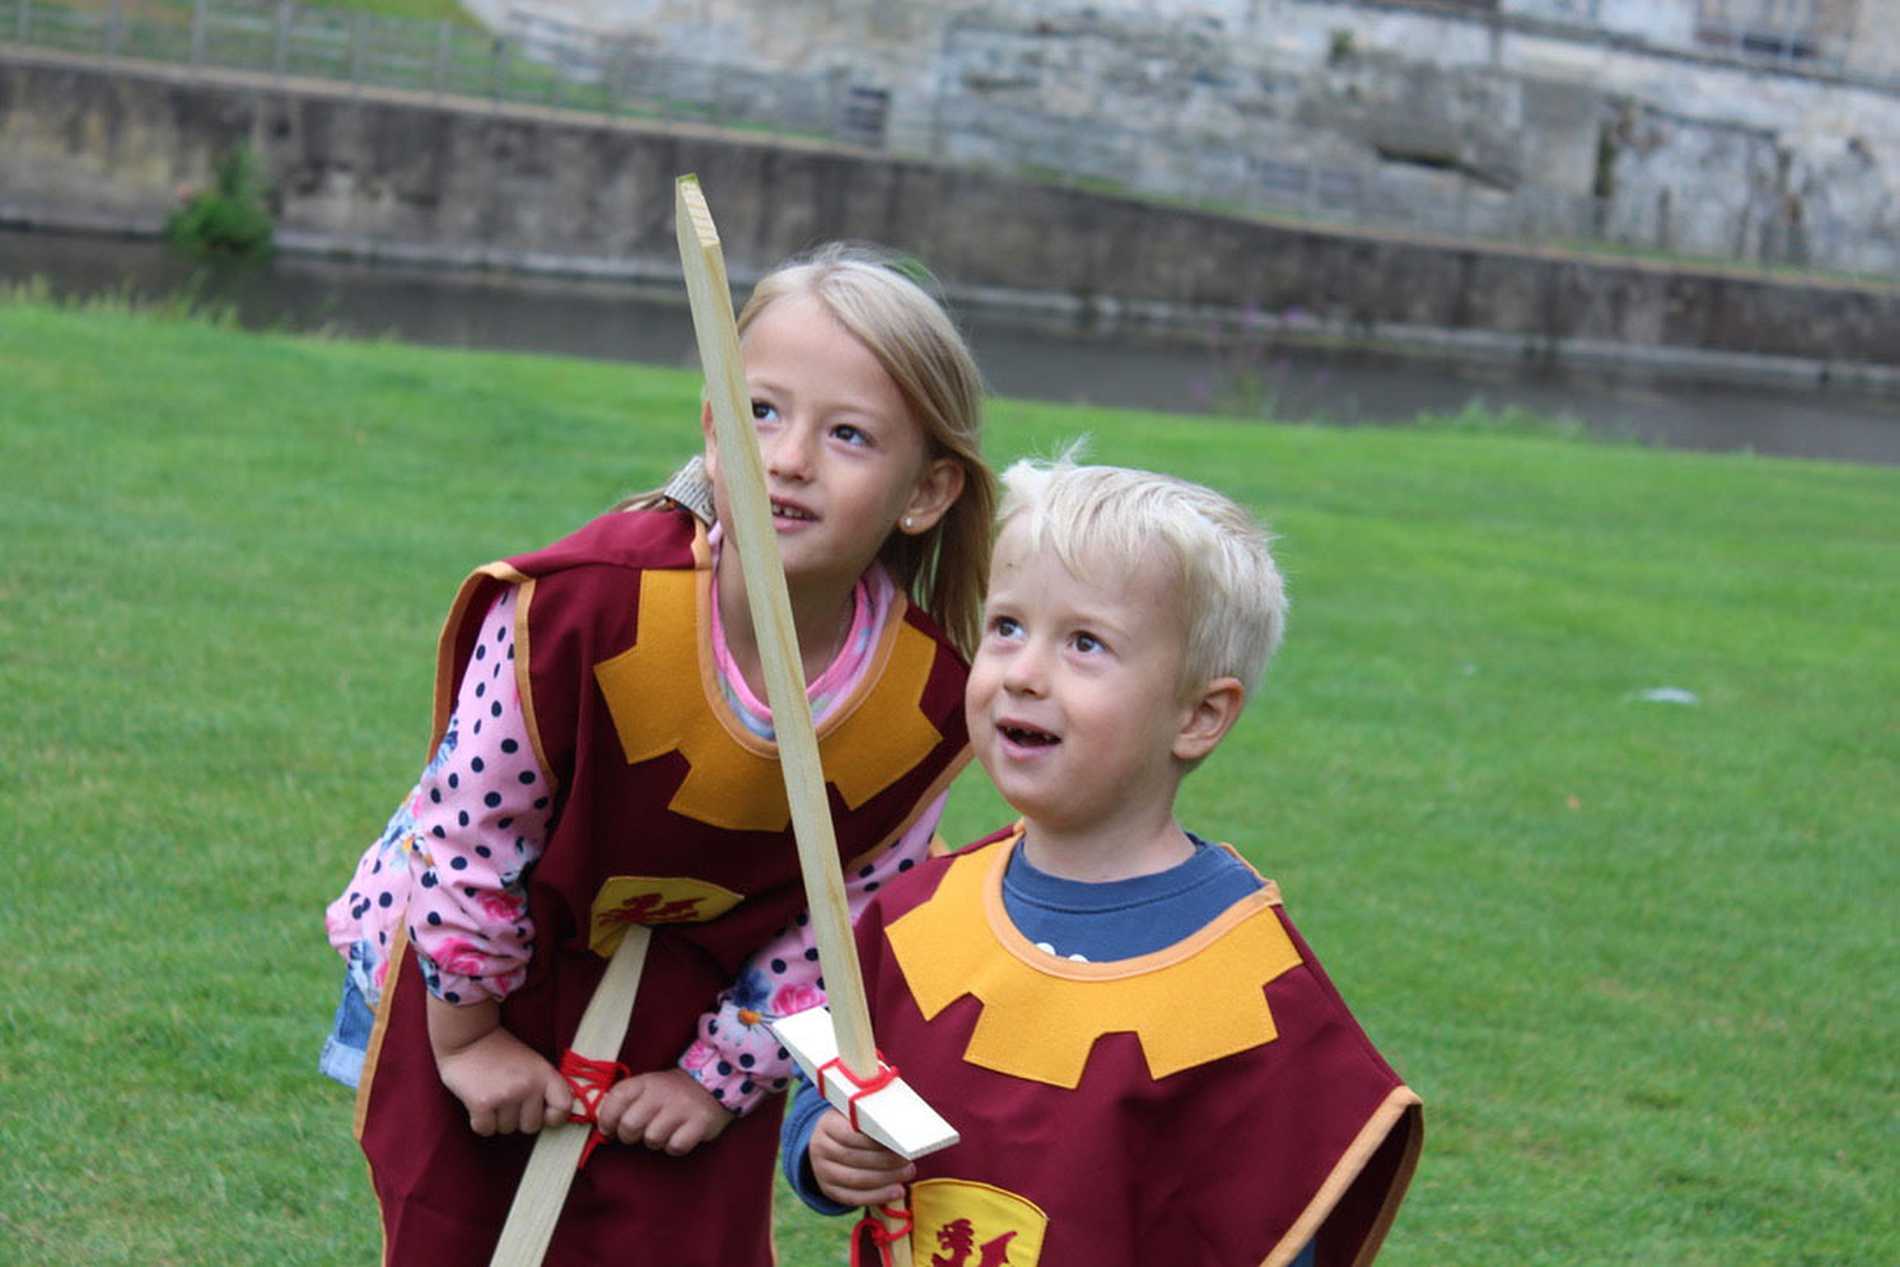 Hunor and his sister, Dorka dressed as knights and holding their swords.